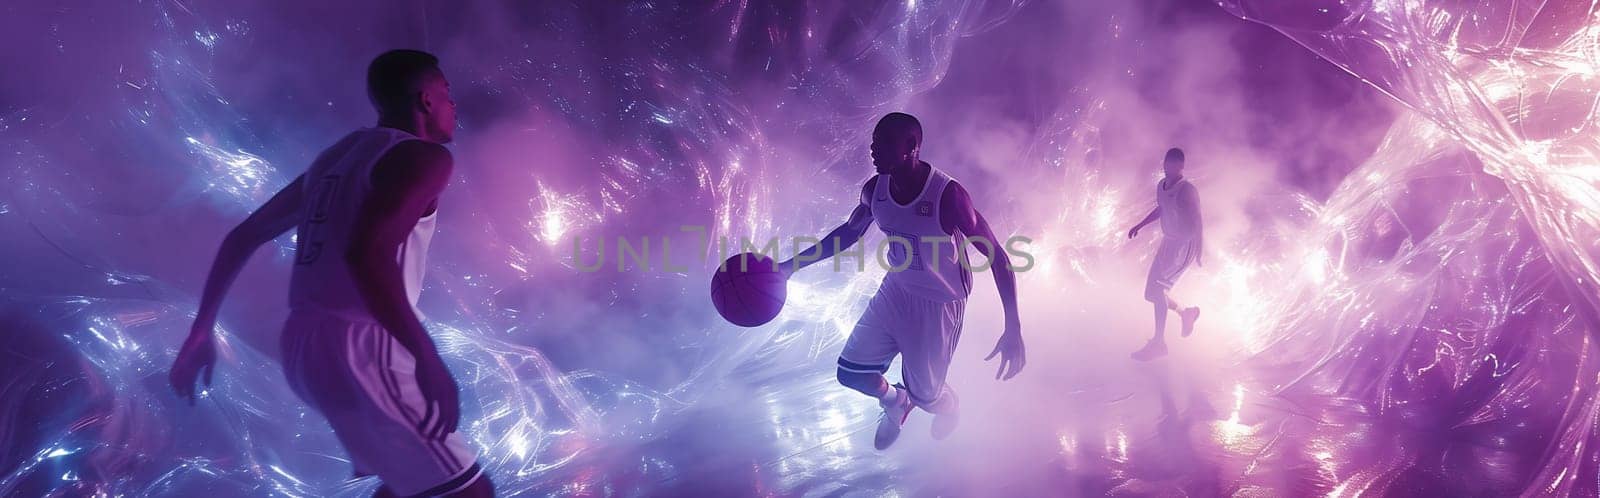 Basketball player players in action on smoke background. Sport banner, flyer by Andelov13